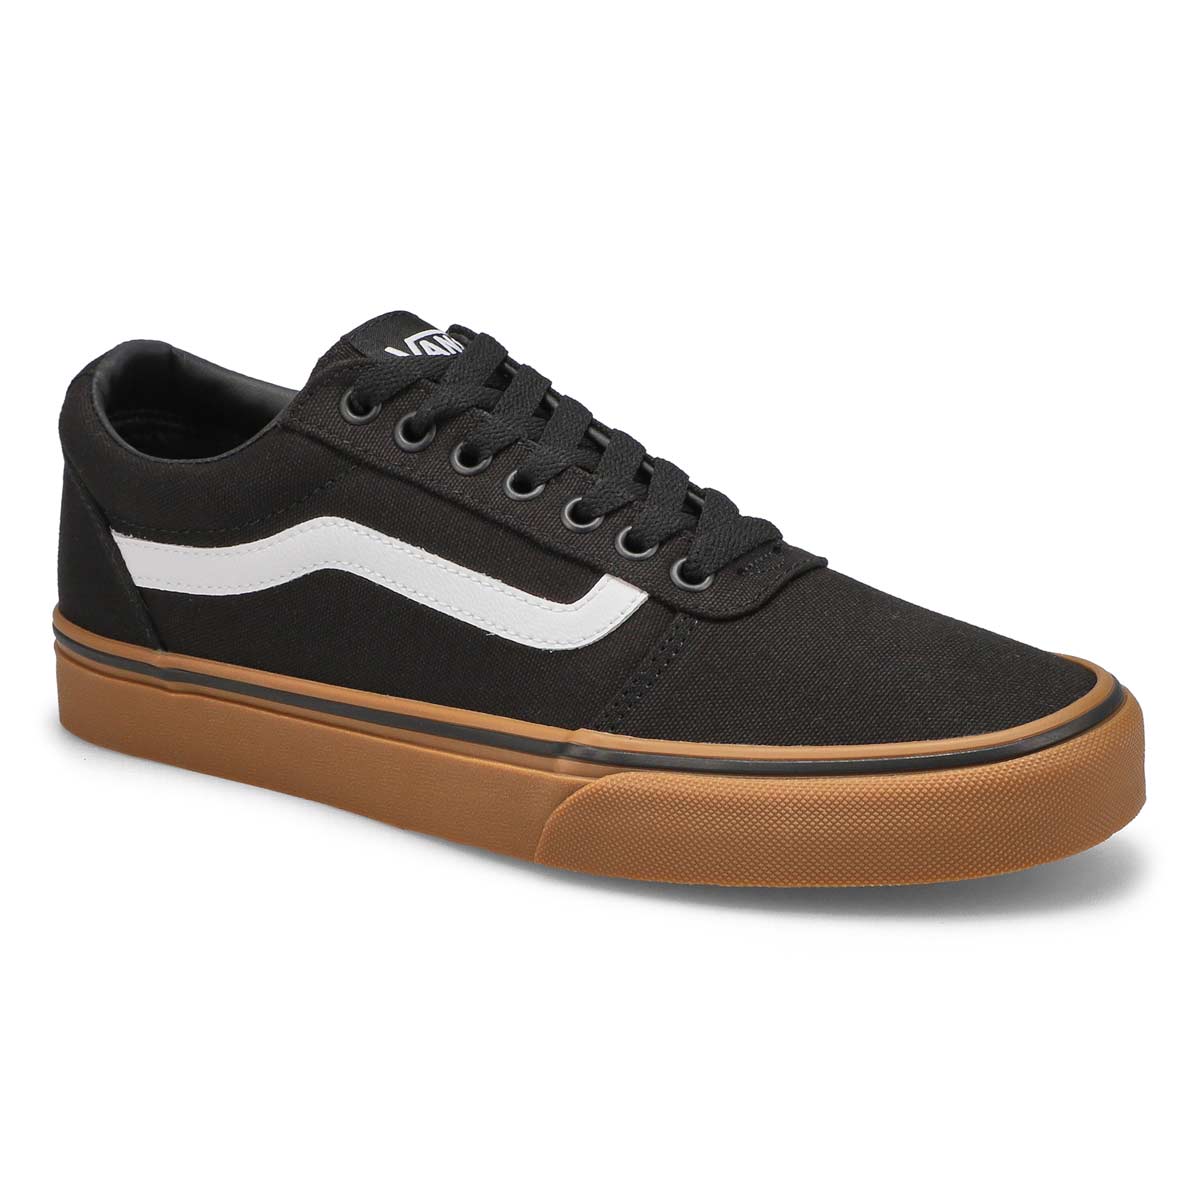 WARD black/gum lace up sneakers 